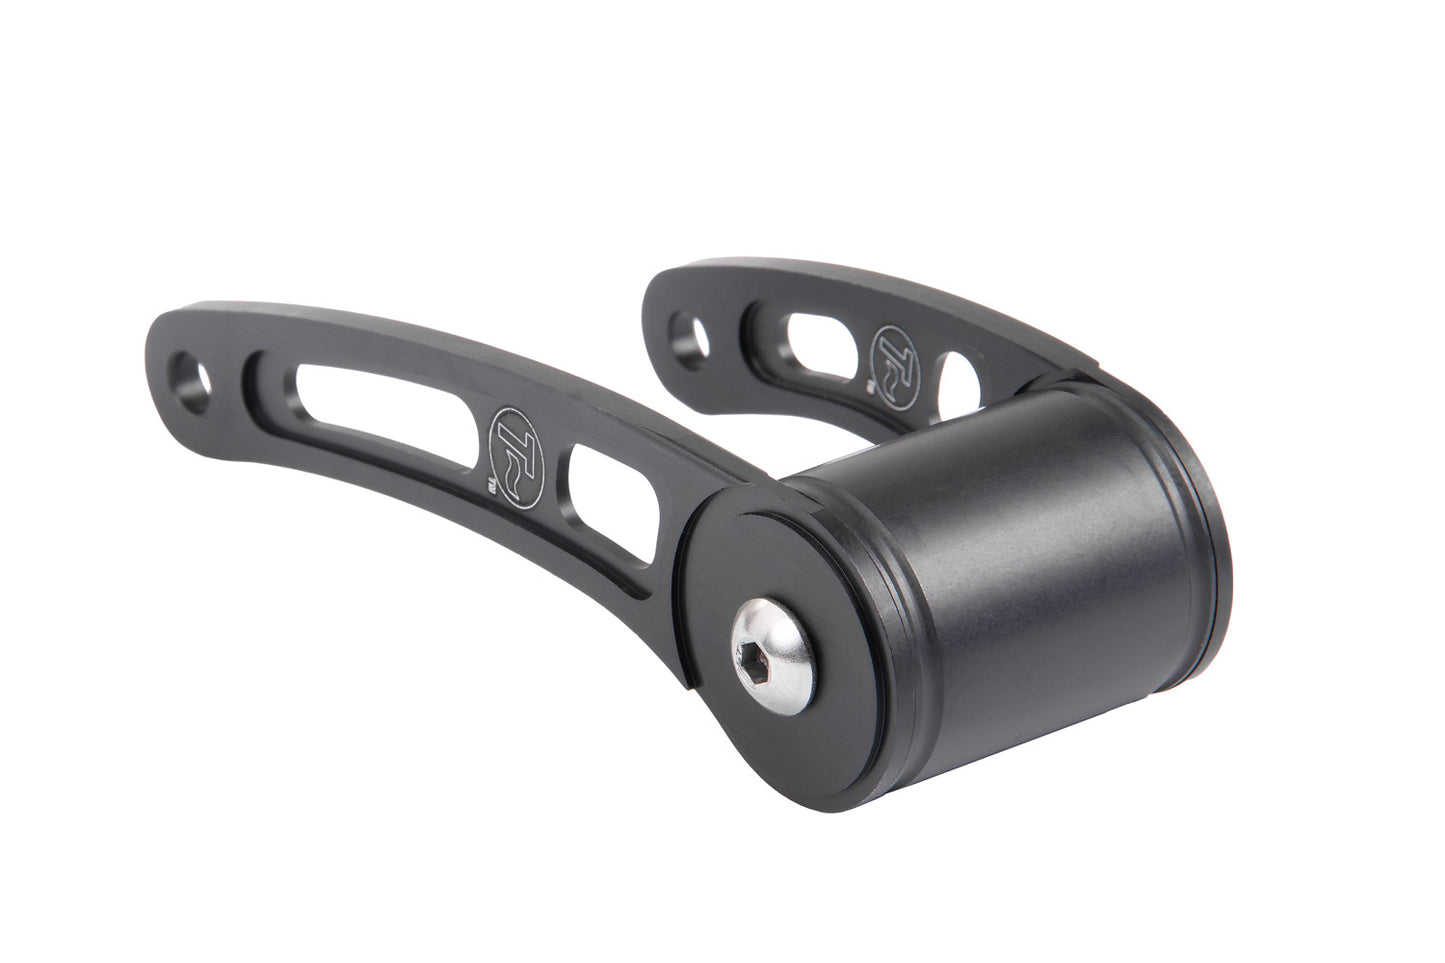 Accessory Mount T-Cycle